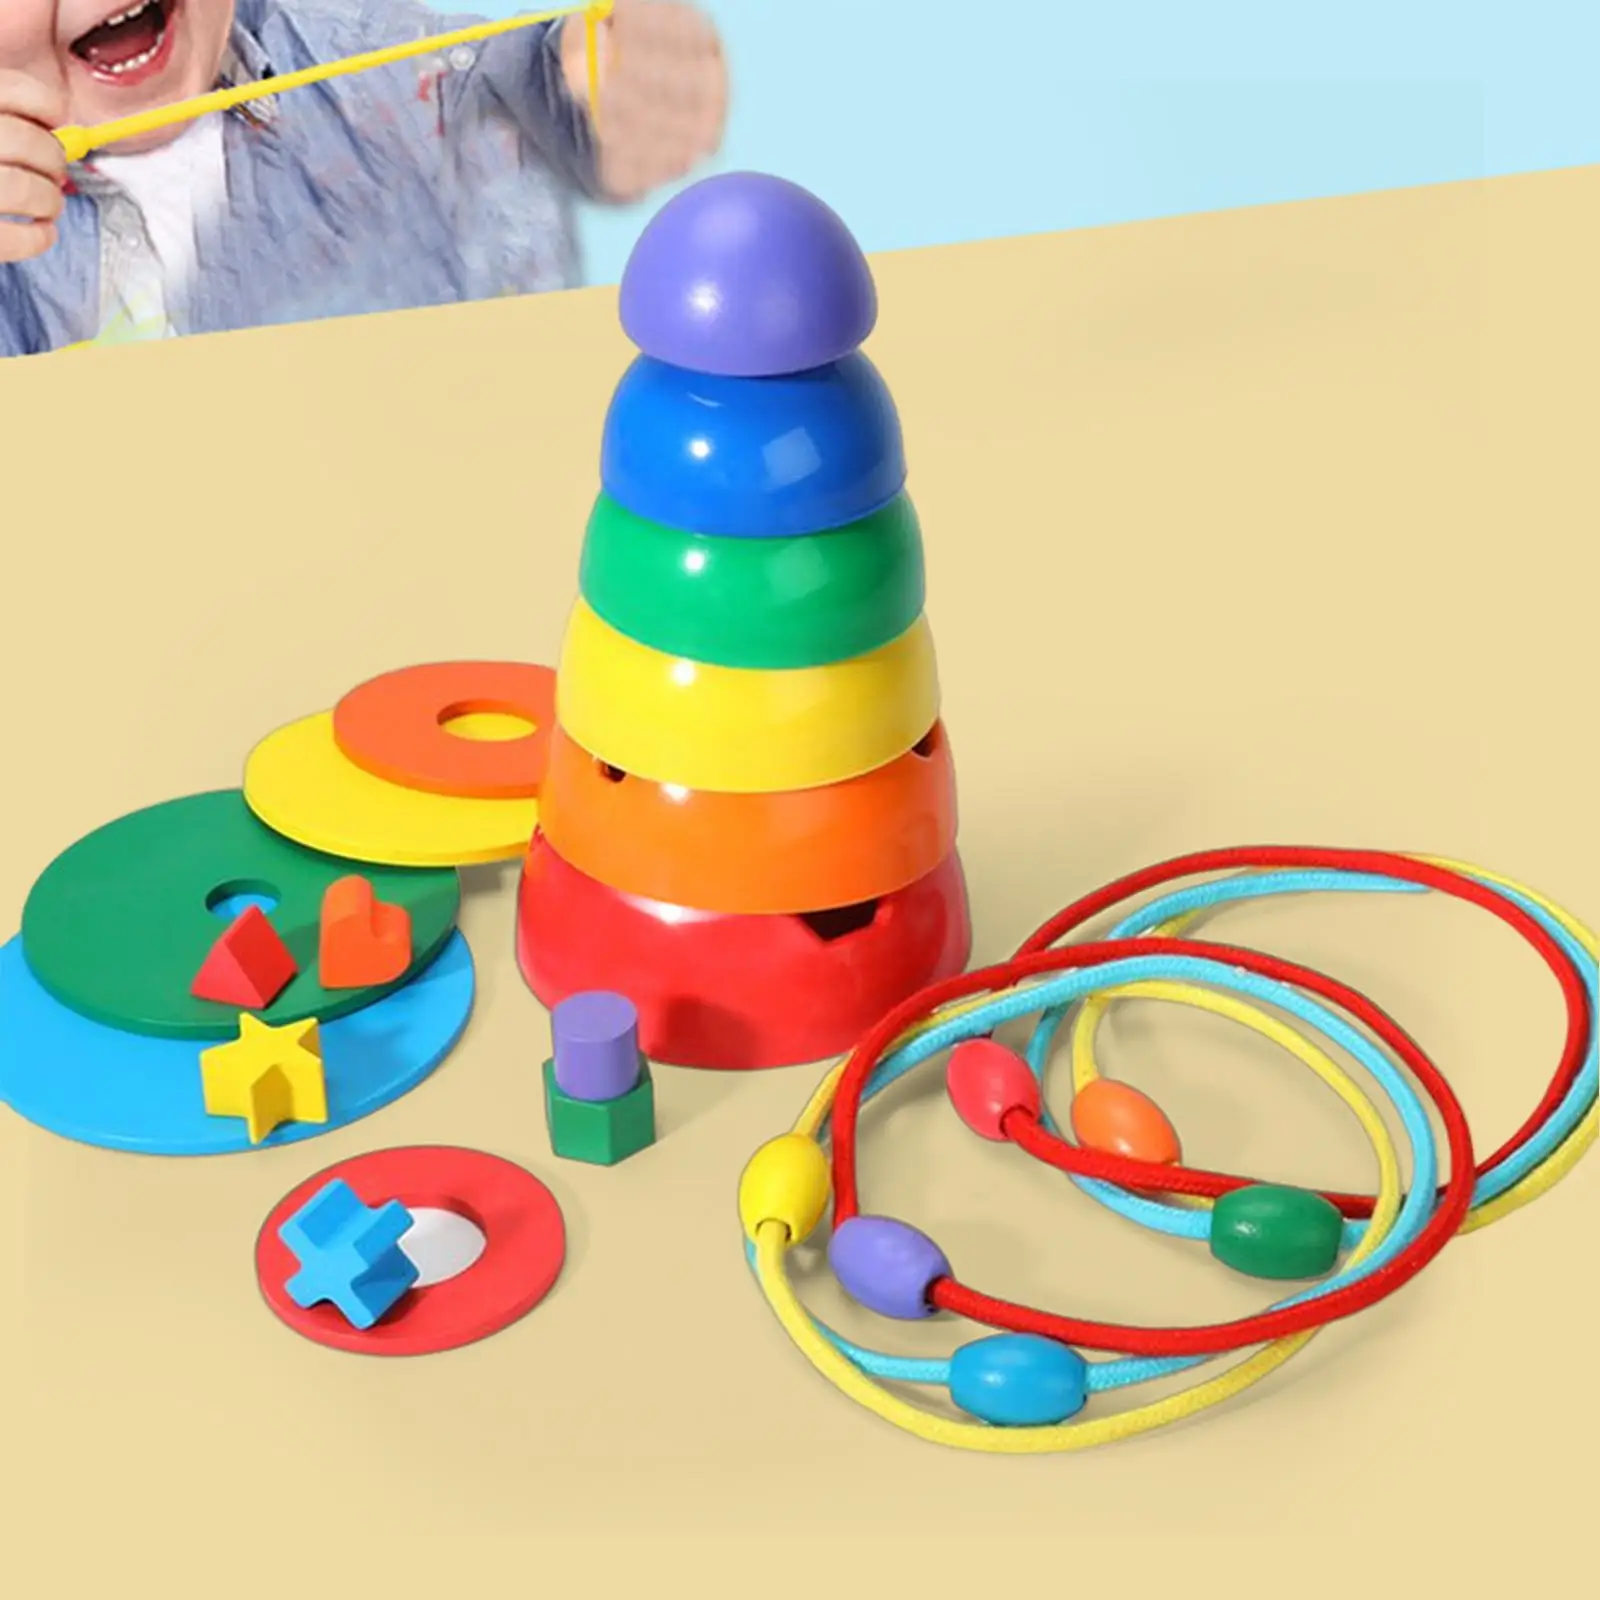 wood Colorful Stacker puzzle Early Learning Color Sorting Development Toy Preschool for Babies Birthday Gift